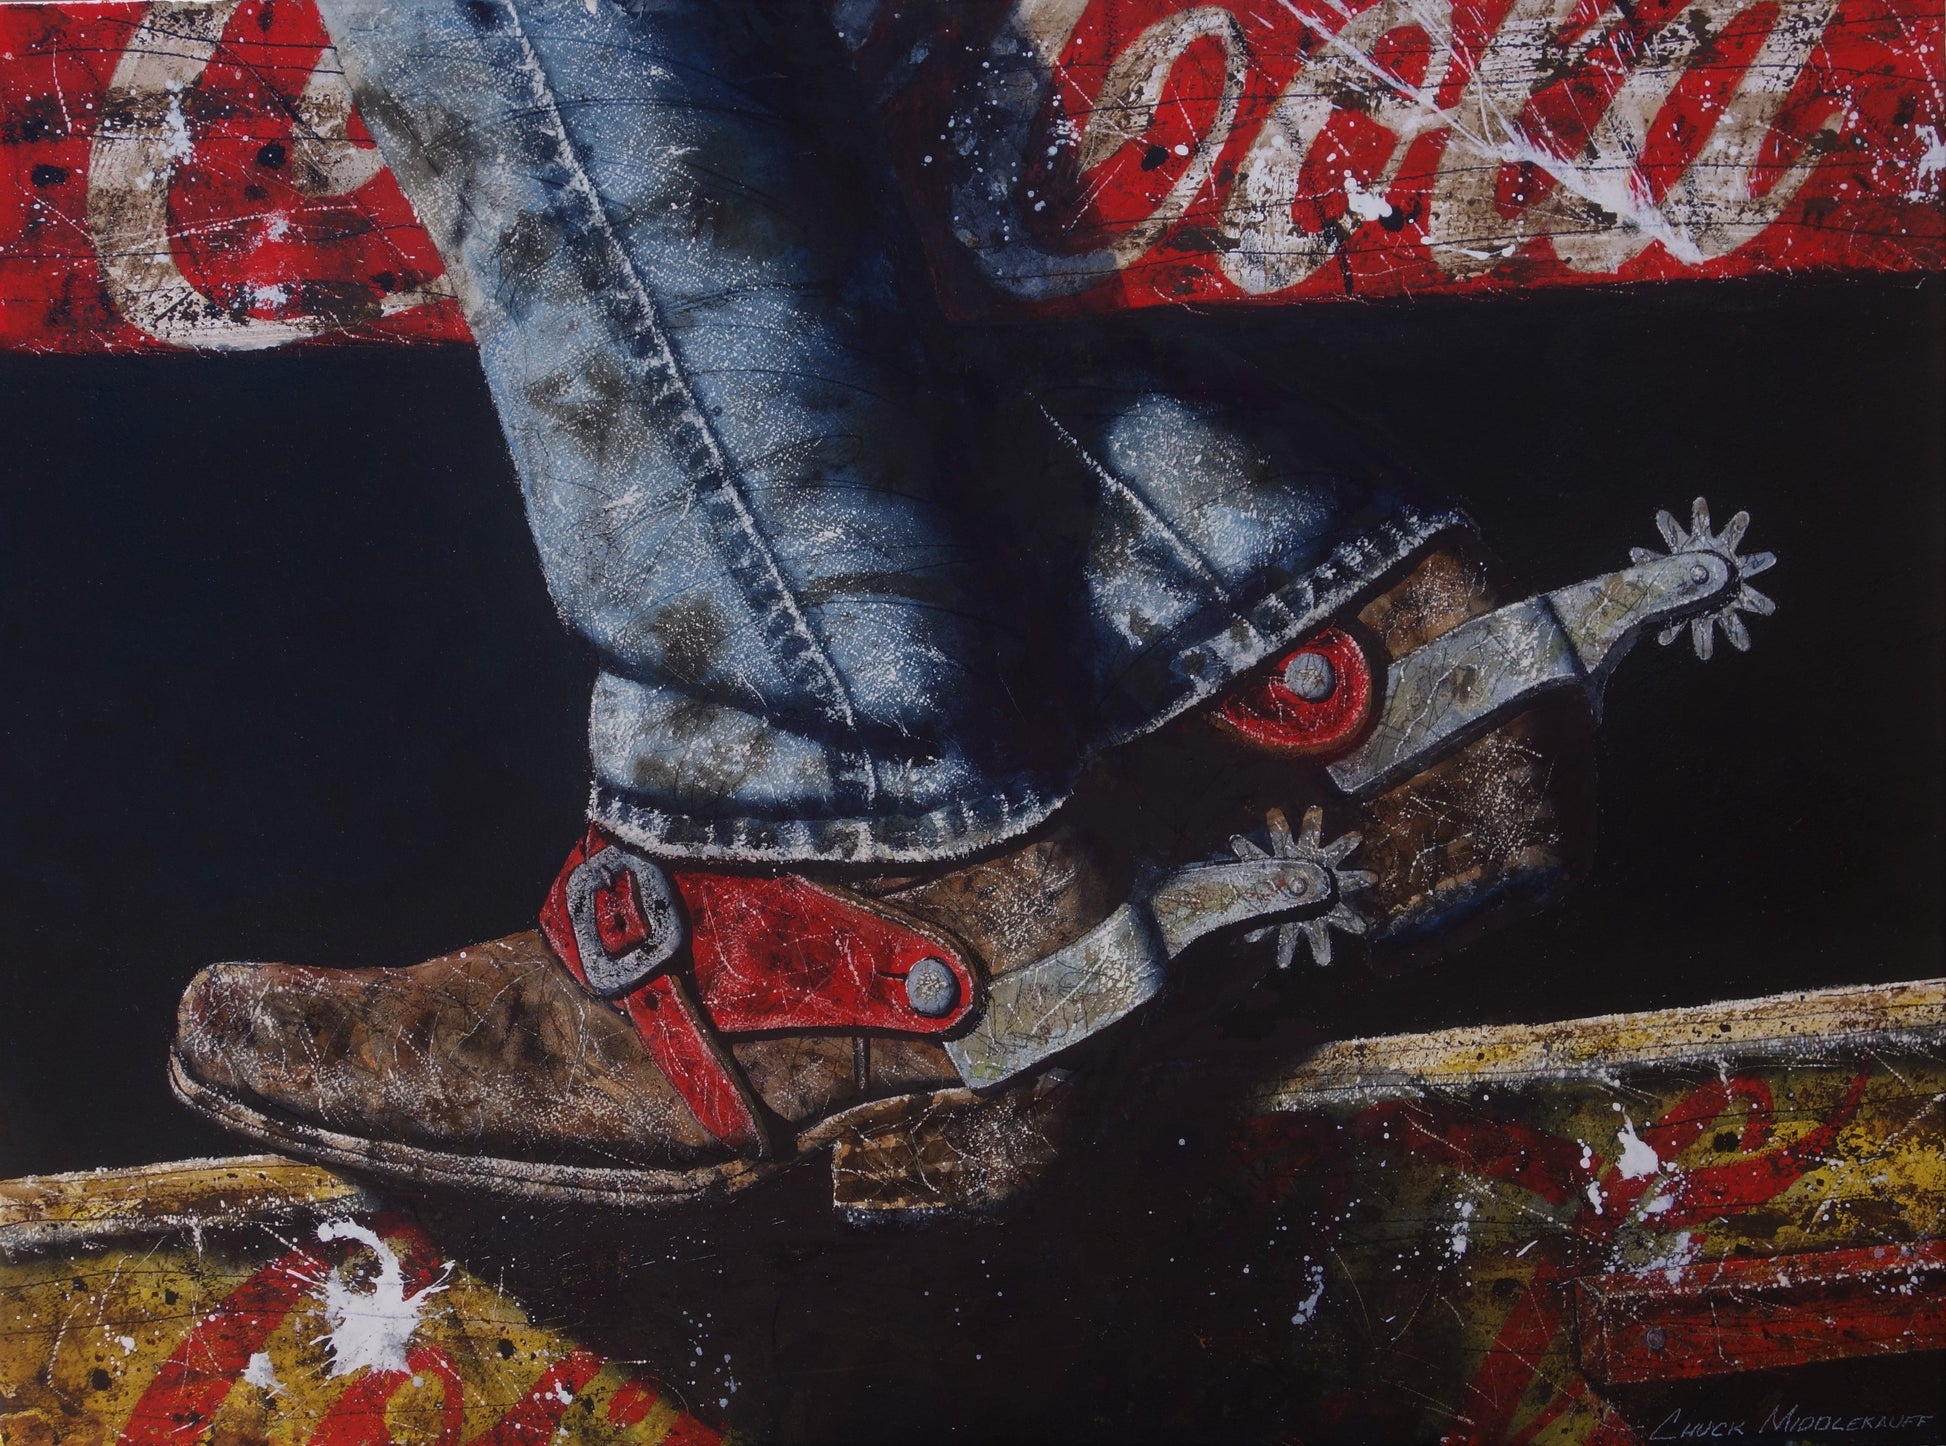 Horse Shoes in Brown-Painting-Chuck Middlekauff-Sorrel Sky Gallery